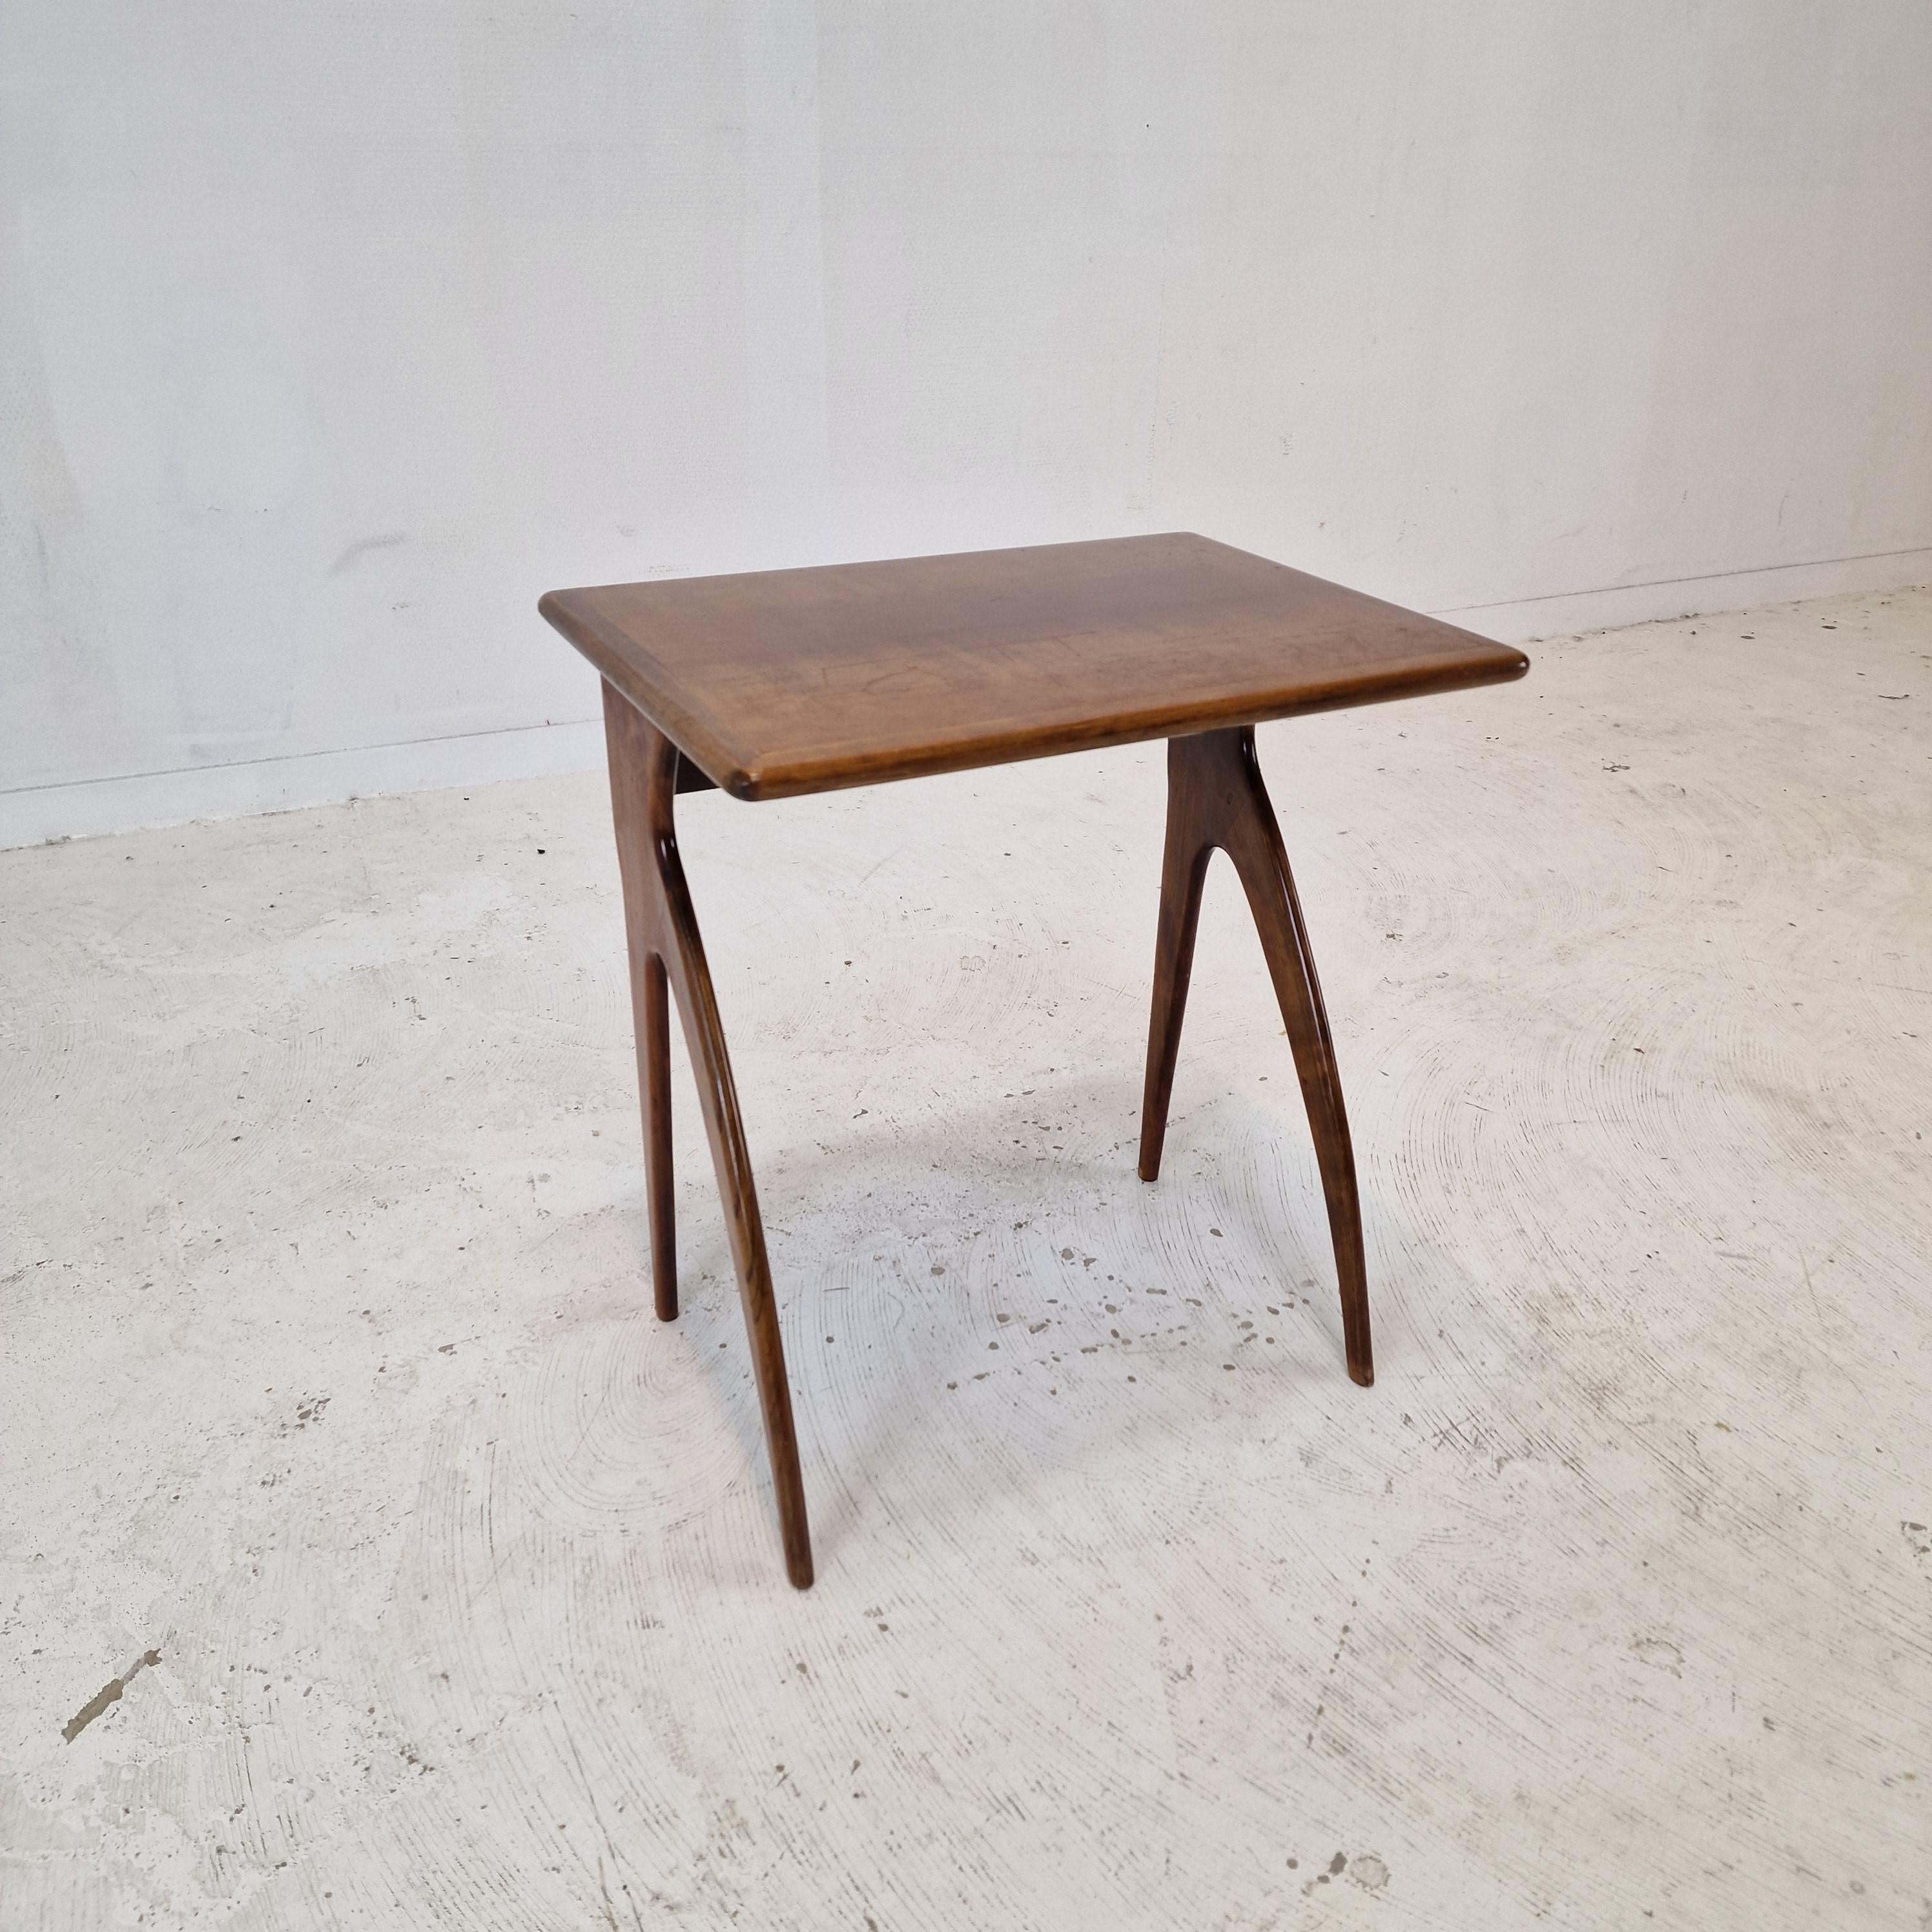 Hand-Crafted Italian Wooden Side Table, 1930s For Sale